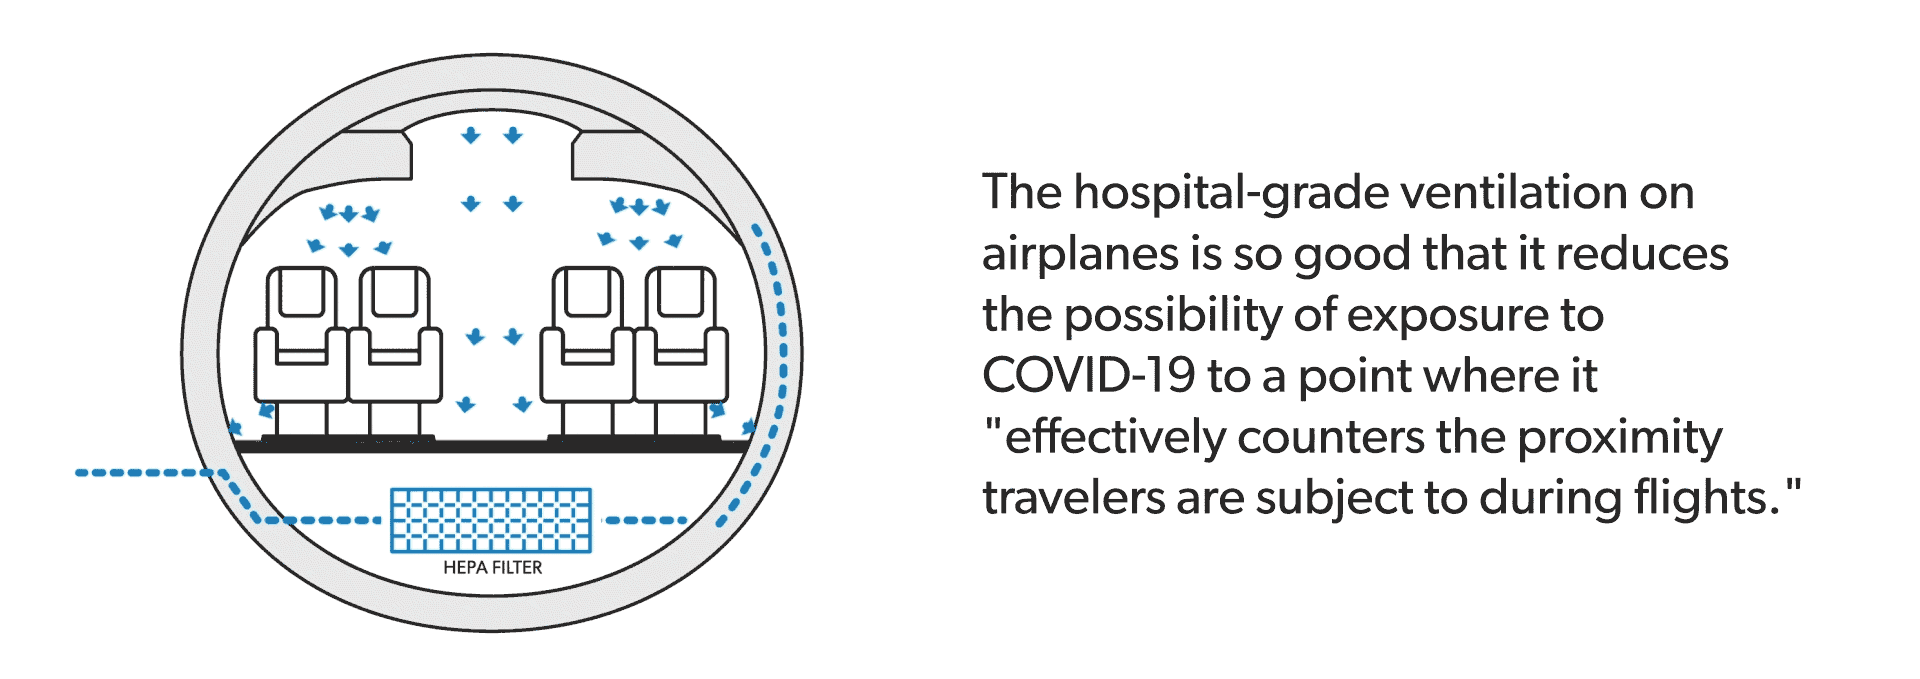 Animation of how the hospital-grade ventilation systems aboard aircraft effectively reduces the possibility of exposure to COVID-19 to a point where it "effectively counters the proximity travelers are subject to during flights."